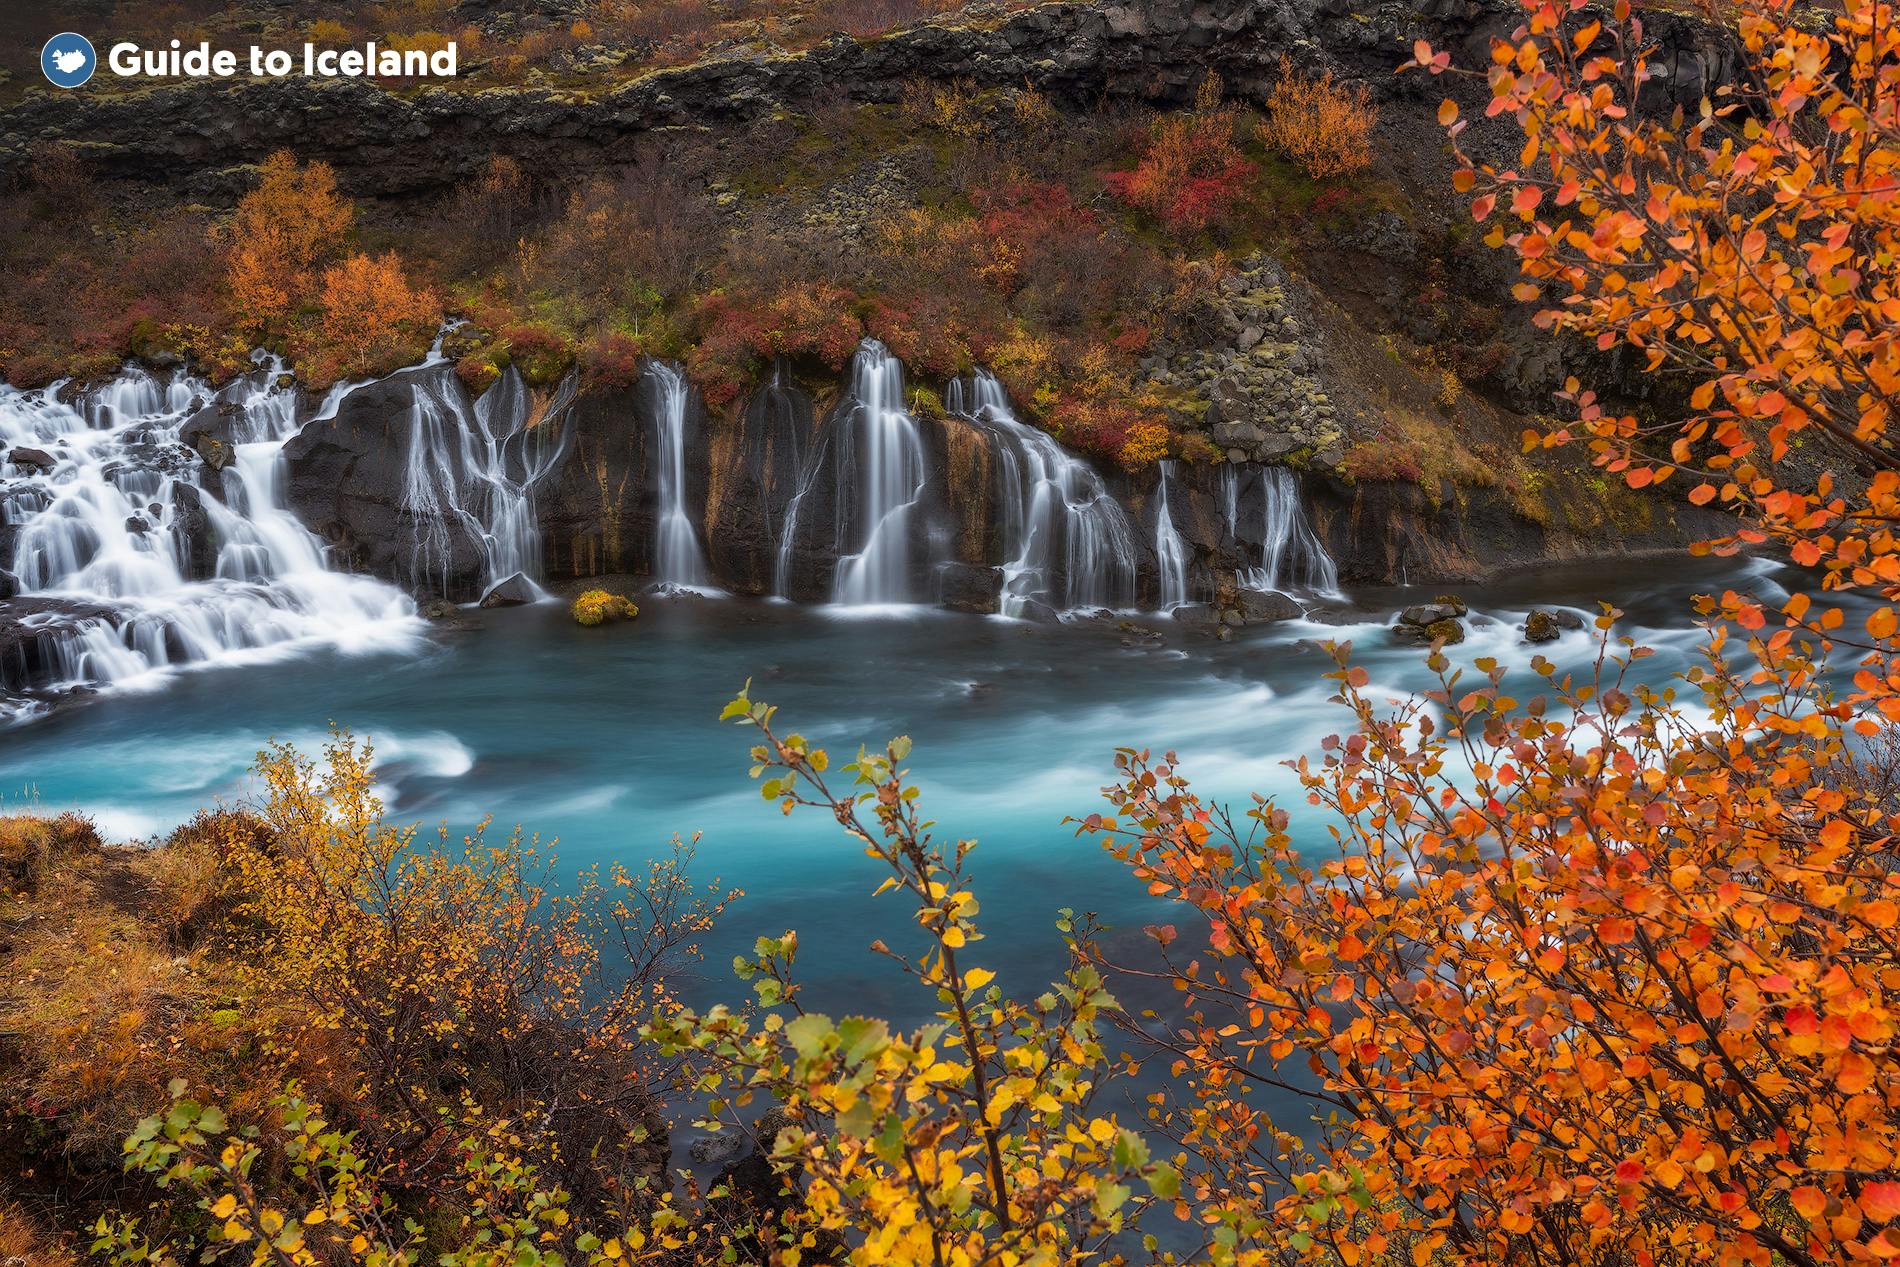 Hraunfossar Waterfalls in the West of Iceland, trickling into a blue glacial river.